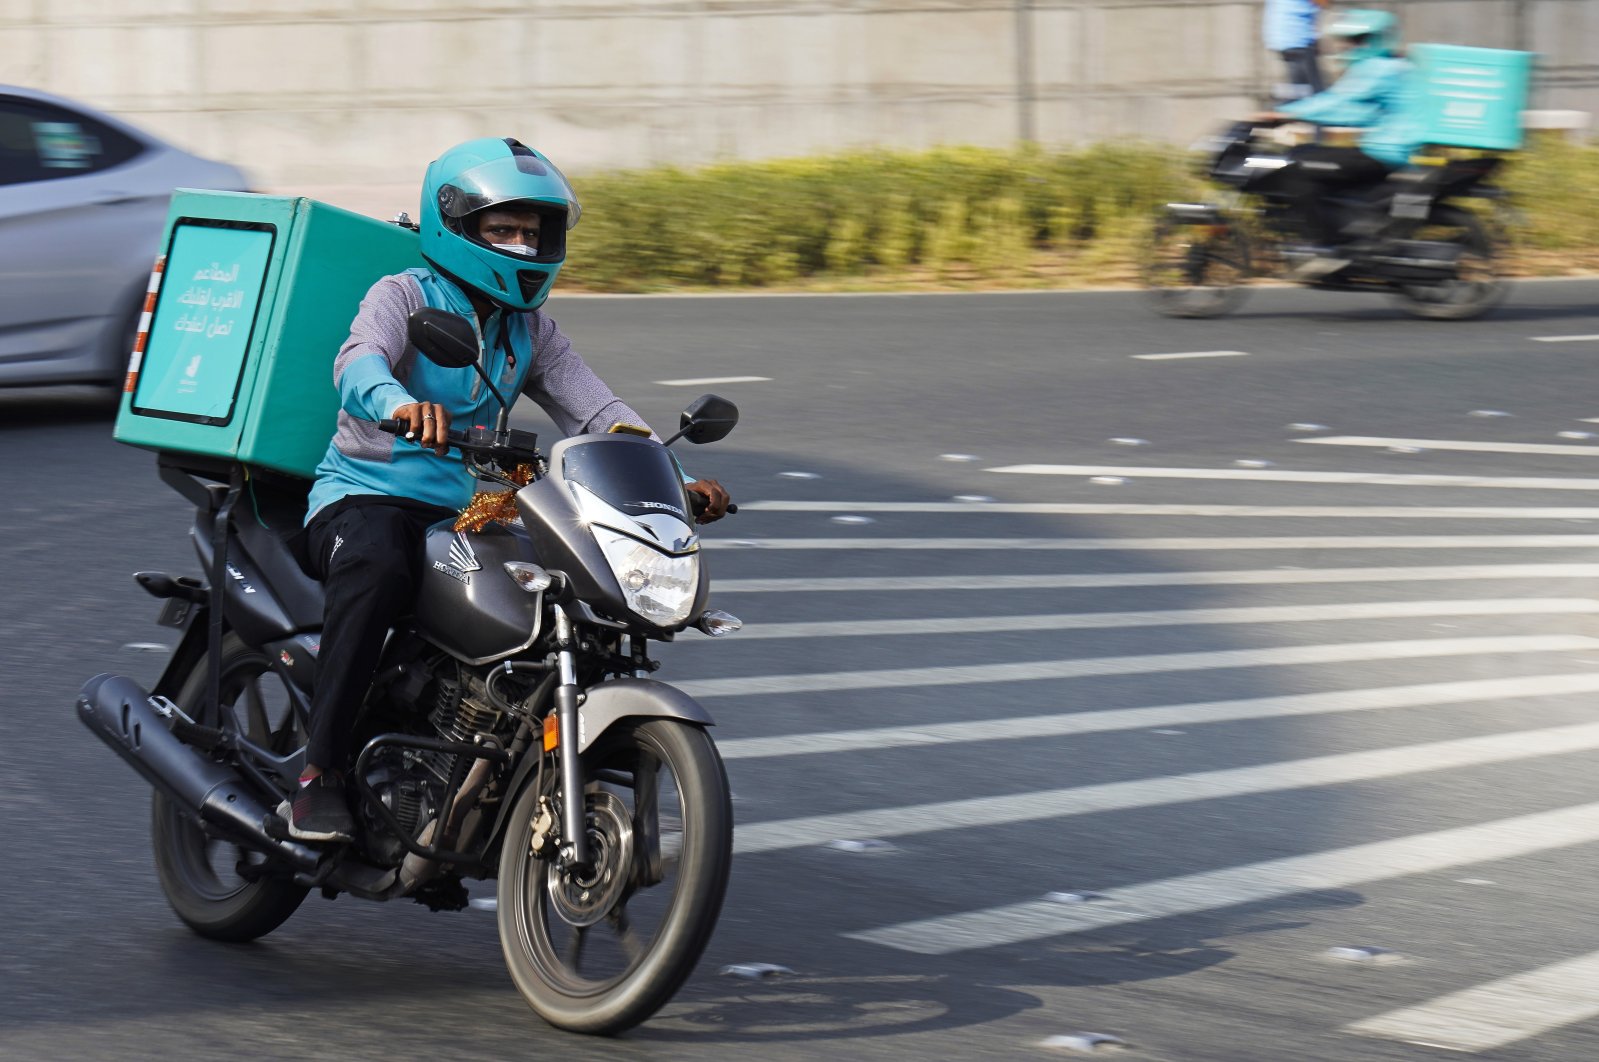 A delivery driver for the app Deliveroo speeds through a roundabout, in Dubai, United Arab Emirates, Sept. 9, 2021. (AP Photo)